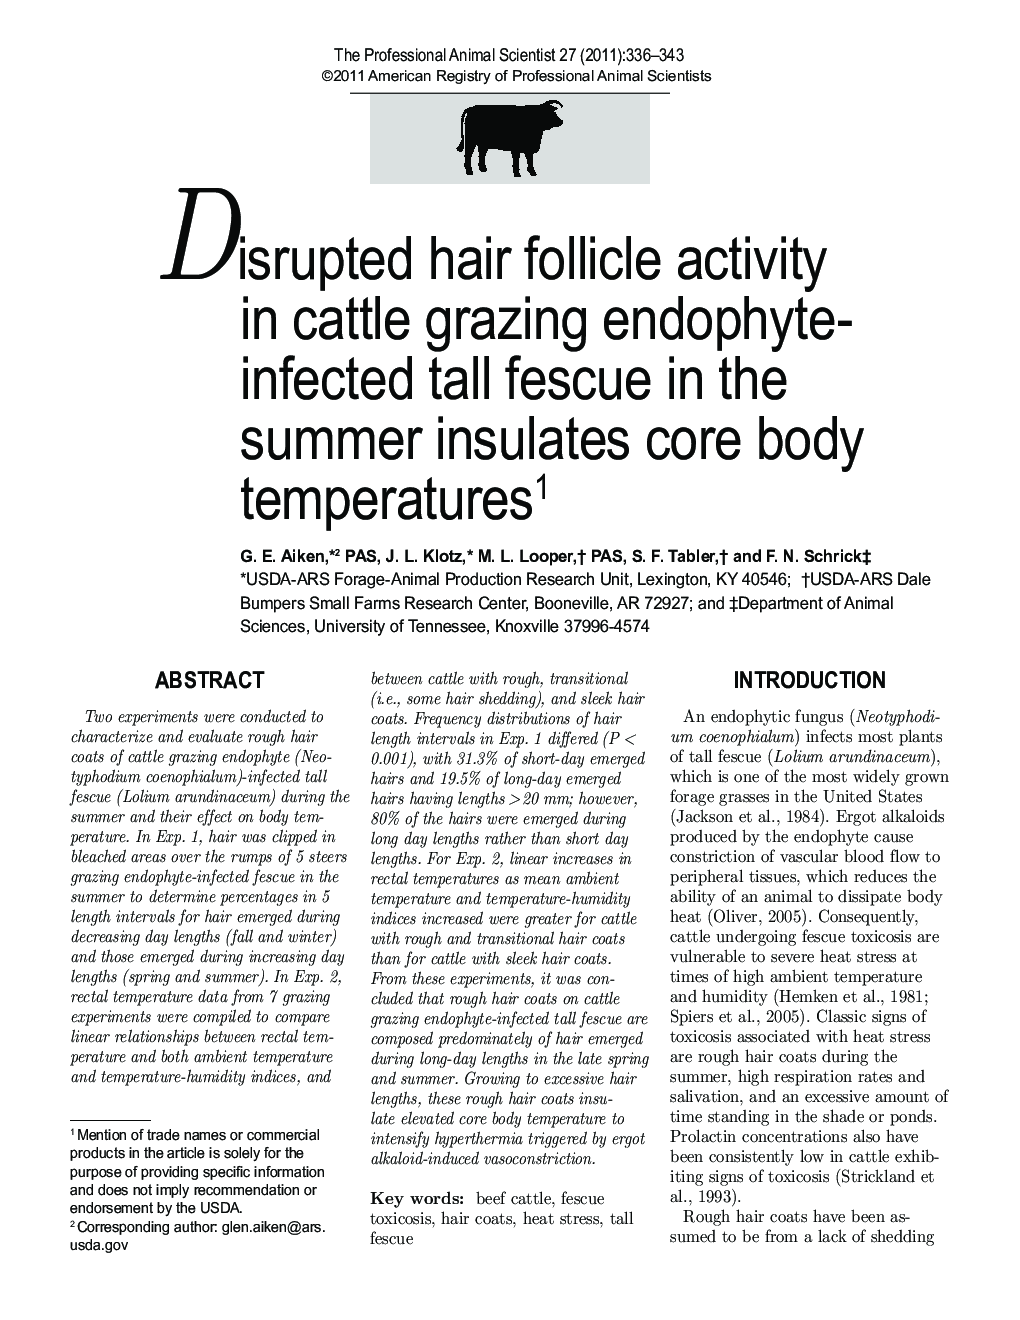 Disrupted hair follicle activity in cattle grazing endophyte-infected tall fescue in the summer insulates core body temperatures1